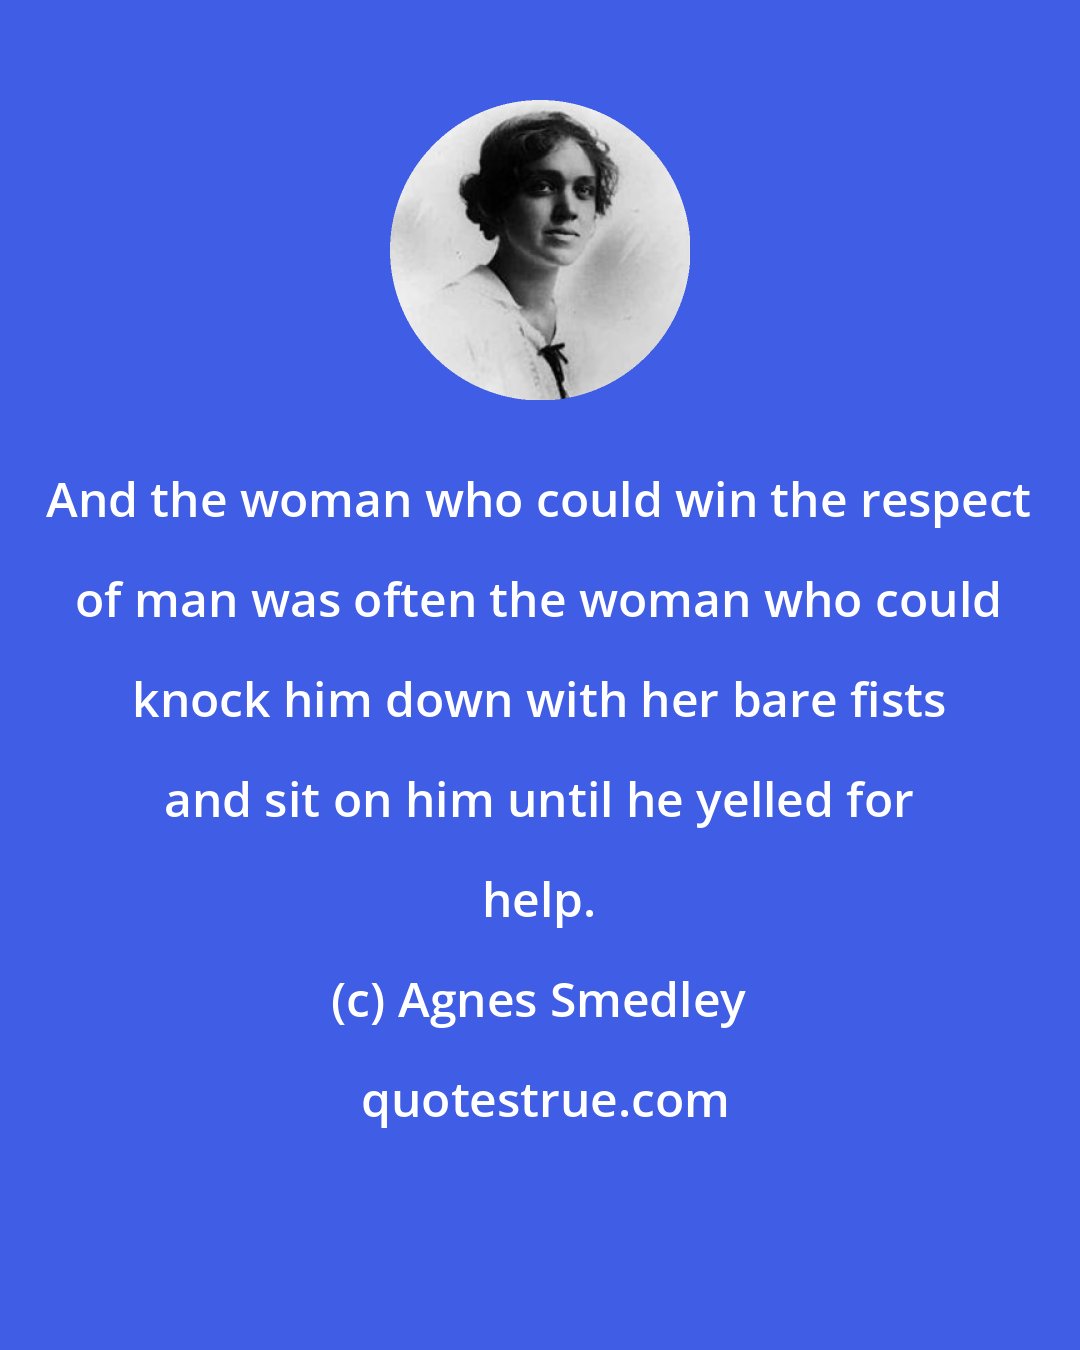 Agnes Smedley: And the woman who could win the respect of man was often the woman who could knock him down with her bare fists and sit on him until he yelled for help.